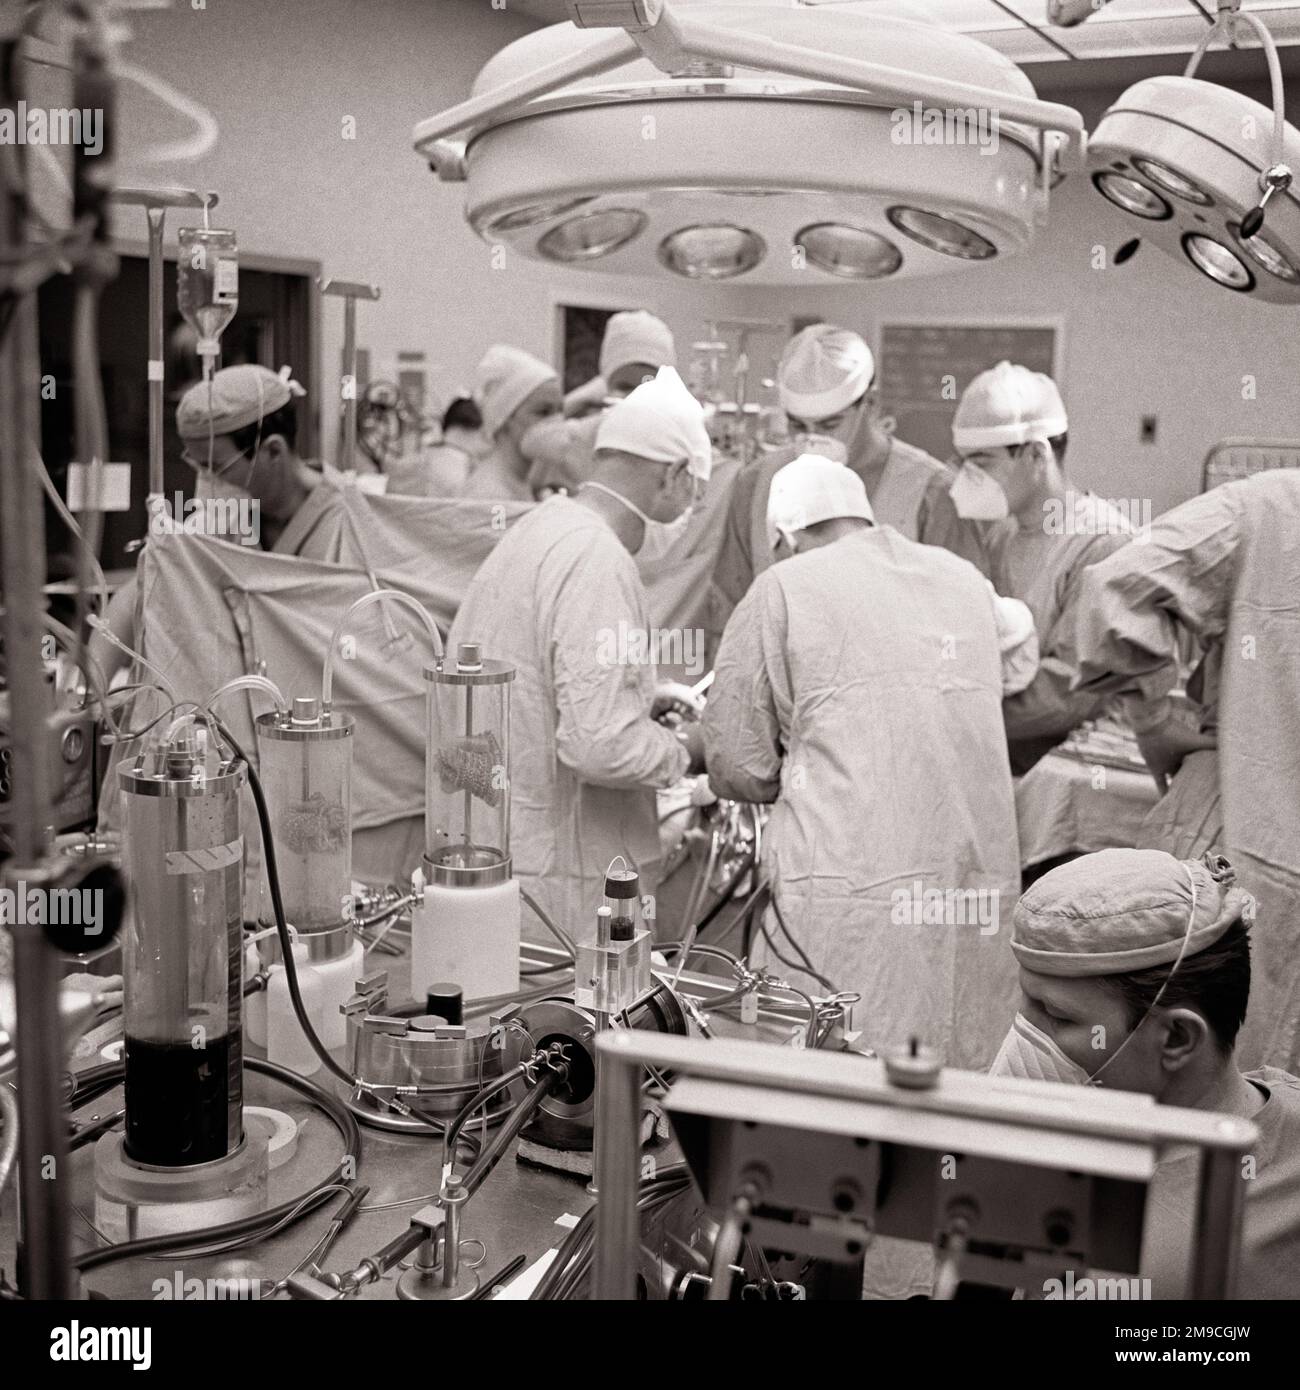 1970s SURGEON & ATTENDANT DOCTORS NURSES TECHNICIANS PERFORMING OPEN HEART SURGERY WITH THE USE OF A HEART LUNG MACHINE - m9054 HAR001 HARS PROVIDER PROVIDERS PRACTITIONERS STERILE HEALING SURGICAL PHYSICIANS SURGEONS INNOVATION OPERATING ROOM HEALTH CARE OPPORTUNITY OCCUPATIONS SURGEON HIGH TECH HEALER HOSPITALS OPERATION PHYSICIAN PRACTITIONER FACILITY TECHNICIANS FACILITIES ATTENDANT COOPERATION CREATIVITY PRECISION PROFESSIONALS SOLUTIONS USE & BLACK AND WHITE CAUCASIAN ETHNICITY HAR001 LUNG OLD FASHIONED Stock Photo